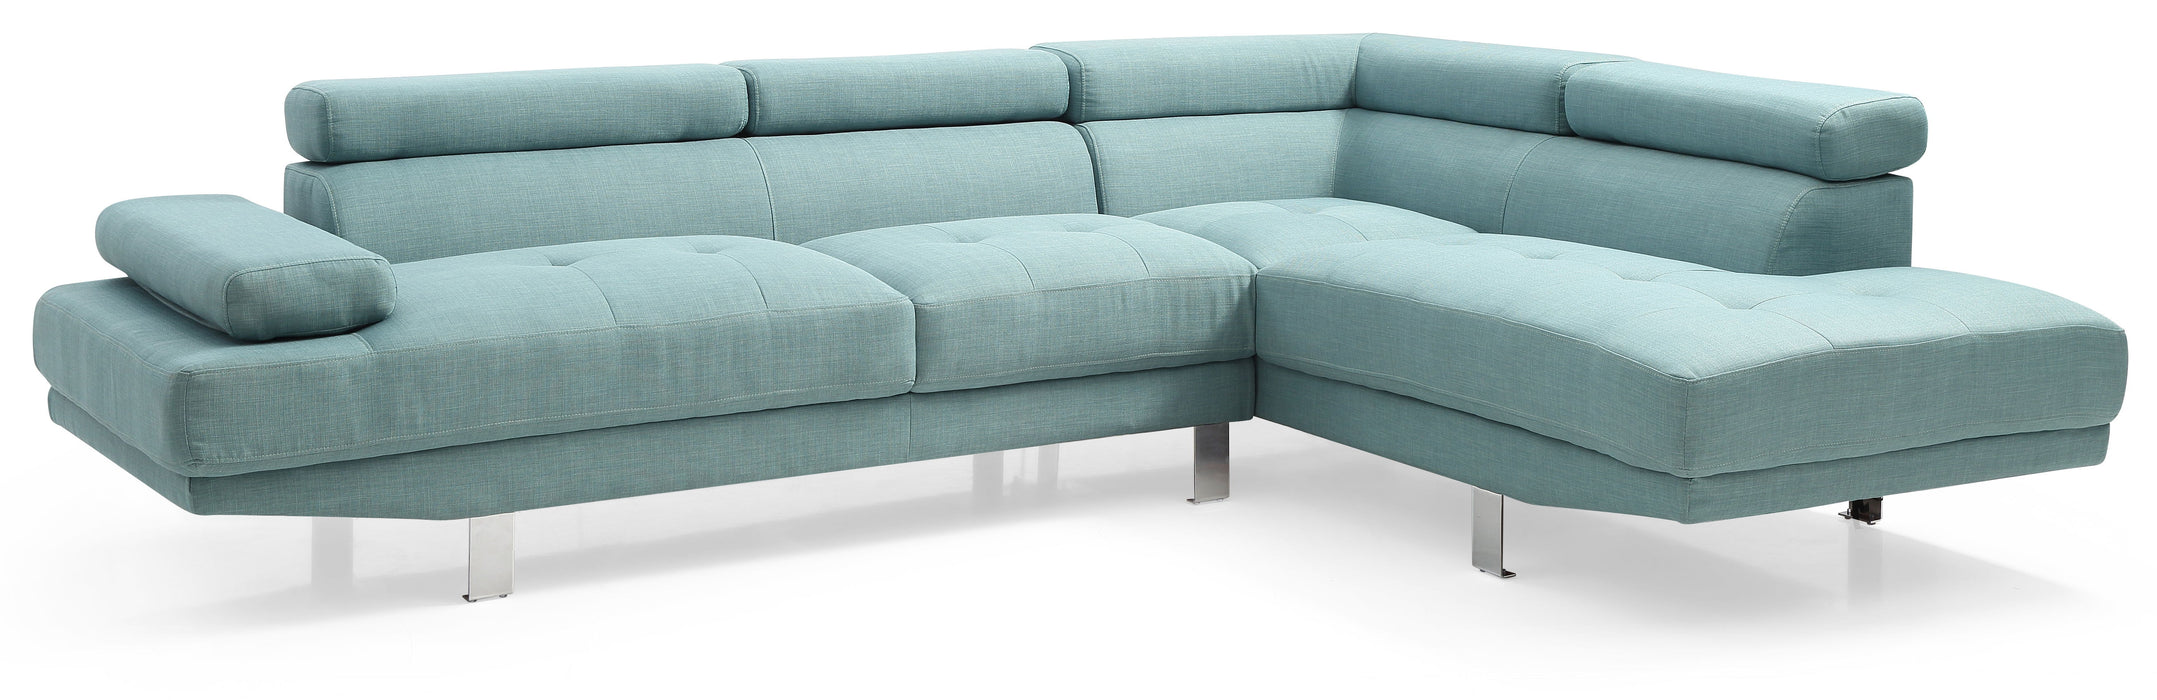 Riveredge - G453-SC Sectional (2 Boxes) - Teal